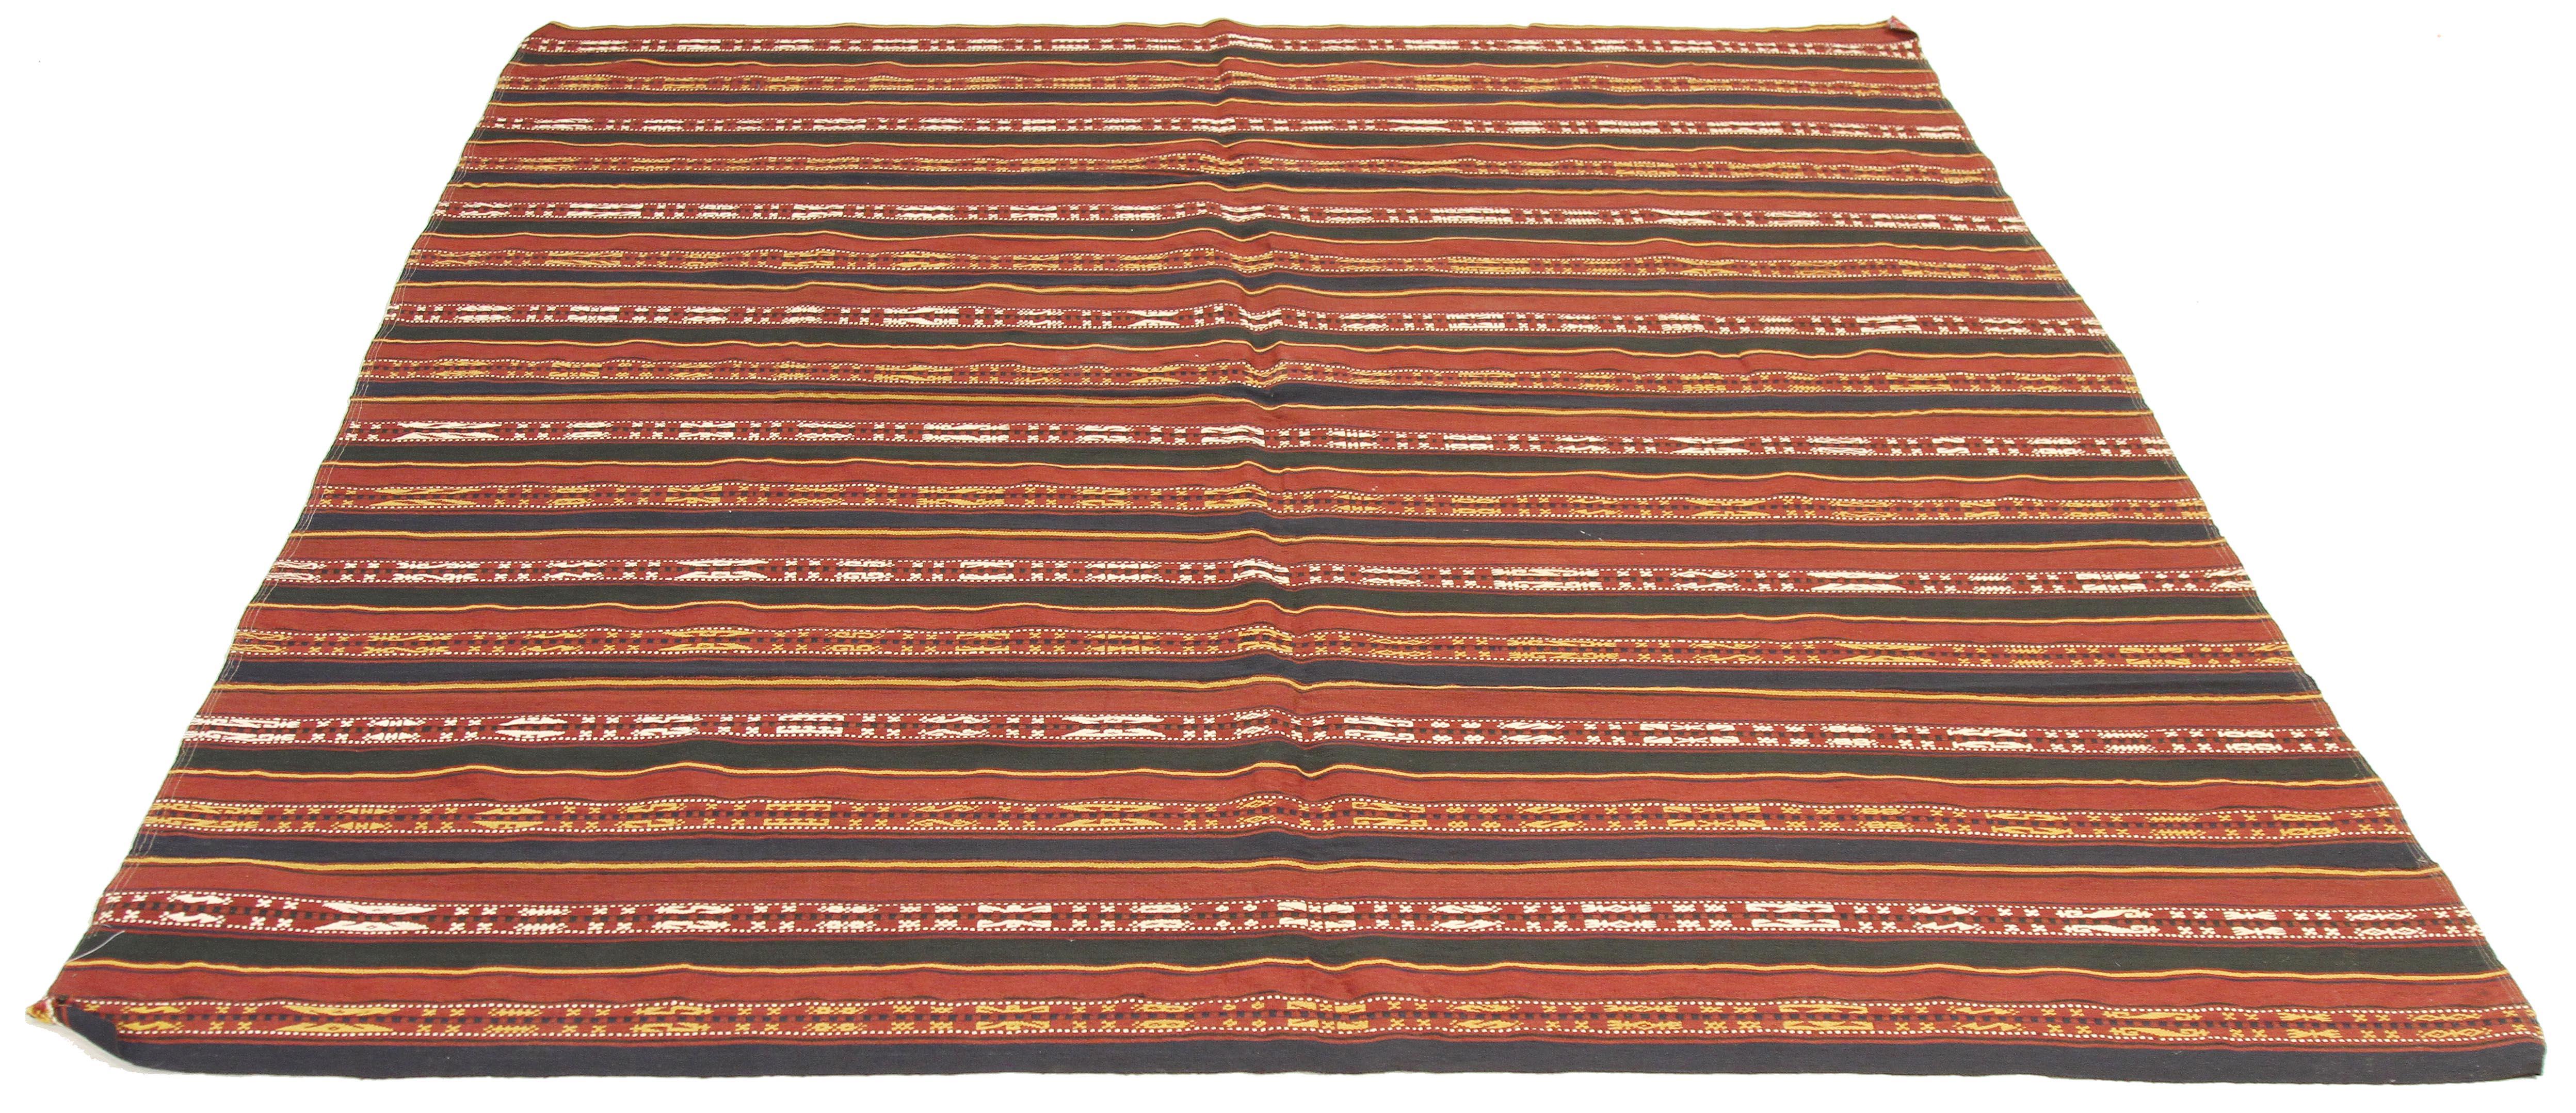 Antique Persian rug handwoven from the finest sheep’s wool and colored with all-natural vegetable dyes that are safe for humans and pets. It’s a traditional Jajim flat-weave design featuring tribal details on colored stripes. It’s a stunning piece